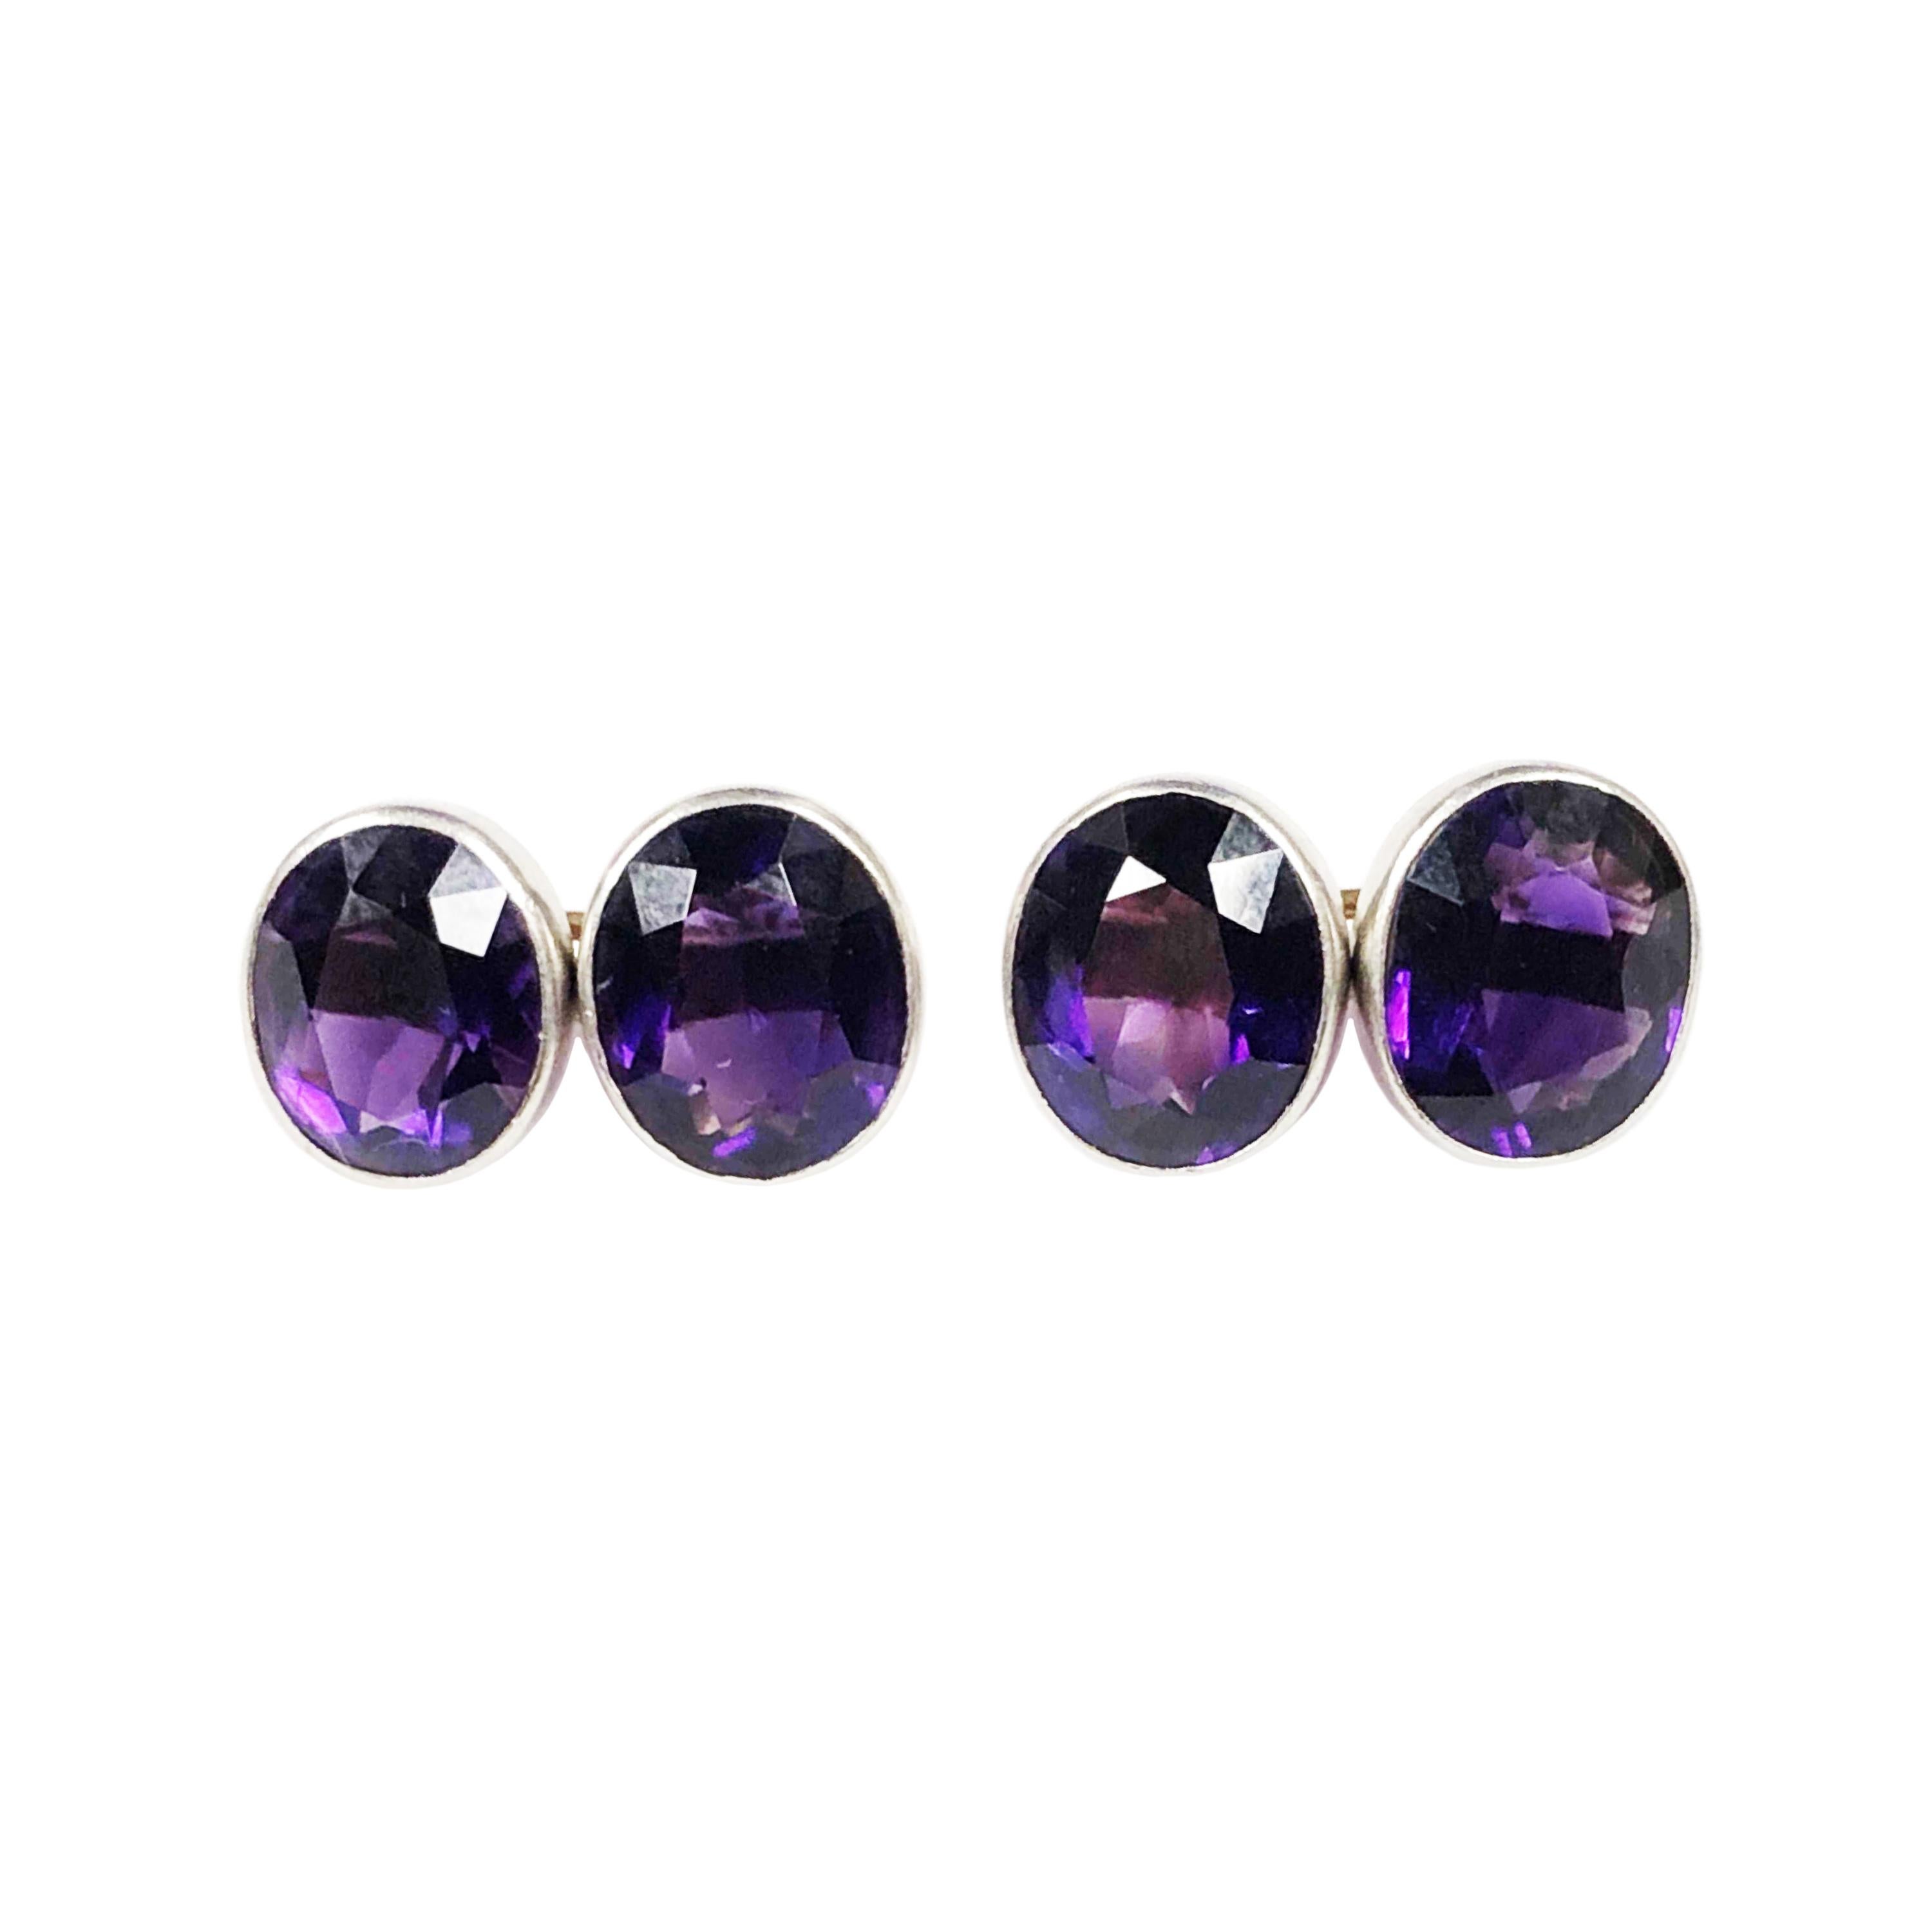 Circa 1910 Black Star & Frost, Platinum and 14K yellow Gold 2 sided Cufflinks, measuring 1/2 X 3/8 inch and set with a Gem color  Oval faceted Amethyst each measuring 11 X 9 approximately 3 Carats. Excellent condition.